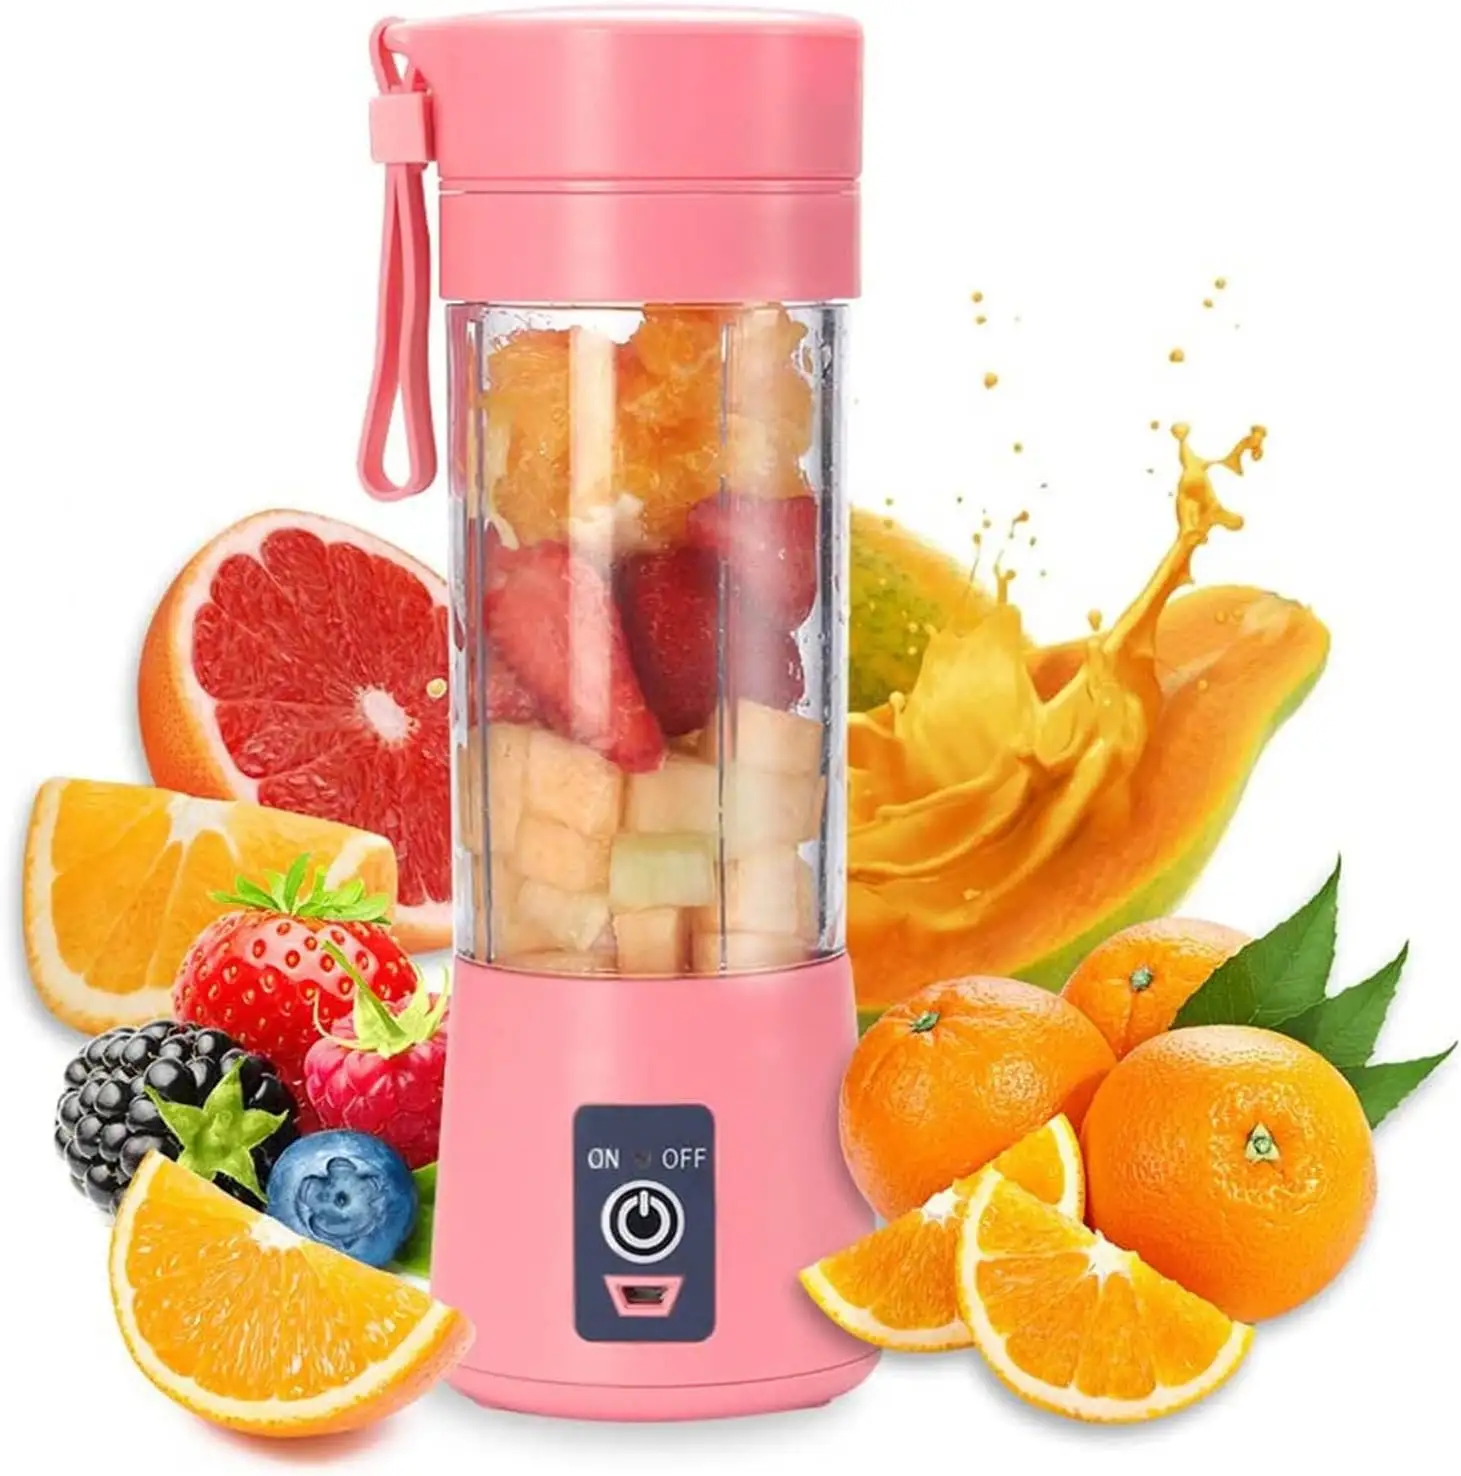 In stock Portable Blender Household Fruit Mixer Six Blades in 3D 380ml USB Juicer Cup